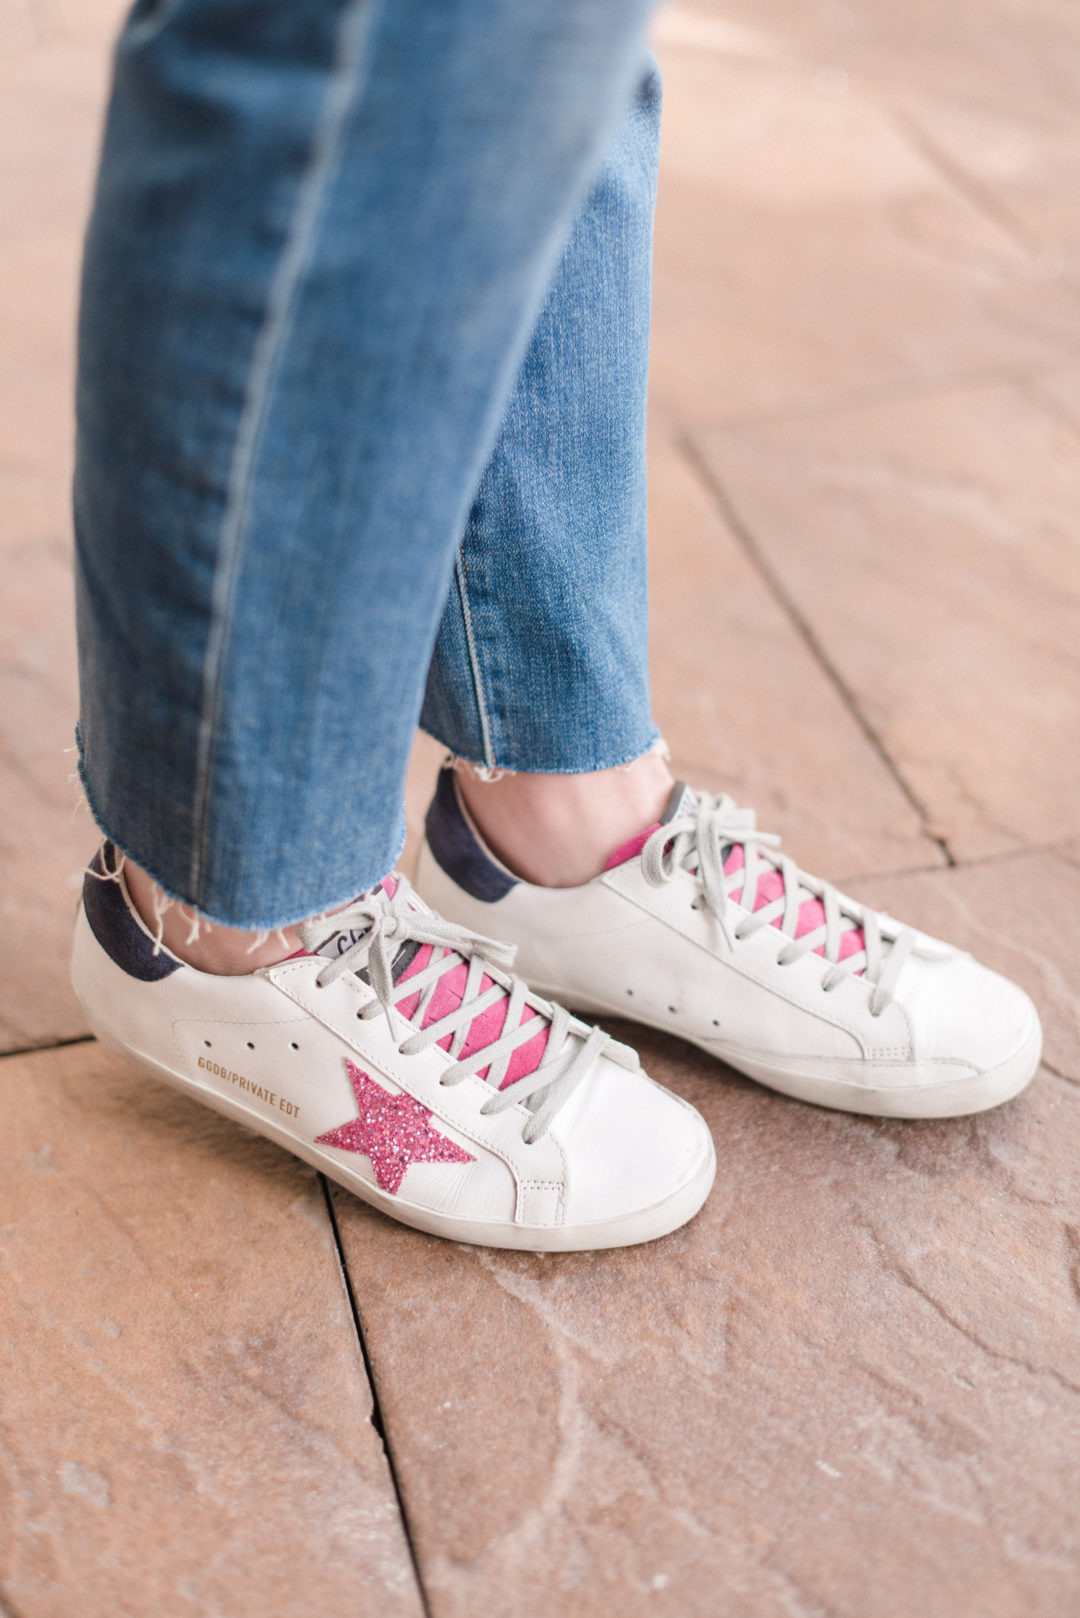 Golden Goose Sneakers Sizing, Selections, Dupes Style Souffle